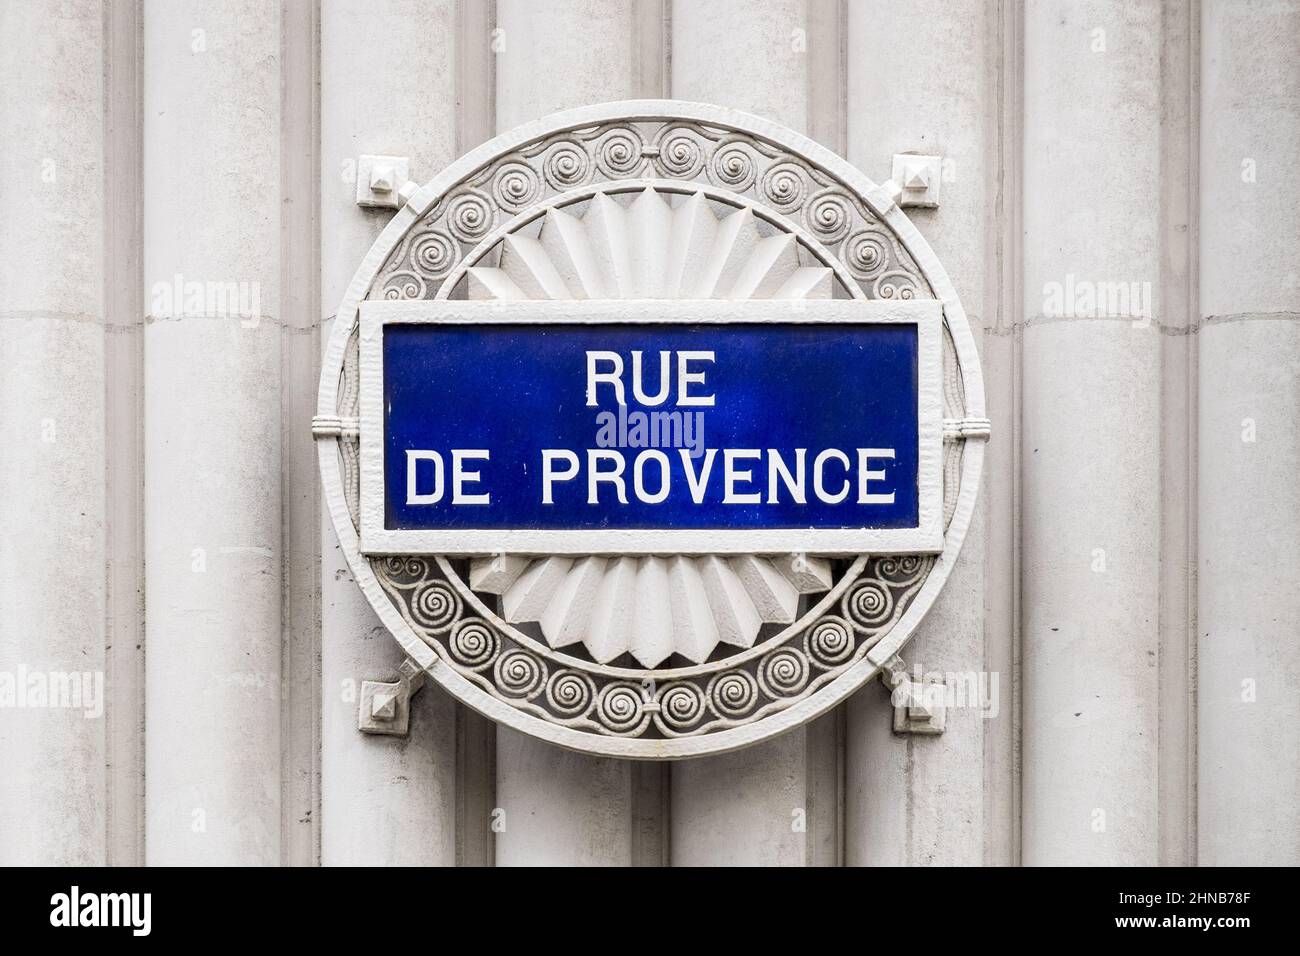 Paris, France, 21 September 2018: Louis Vuitton Letters On A Wall In Paris  Stock Photo, Picture and Royalty Free Image. Image 137197148.